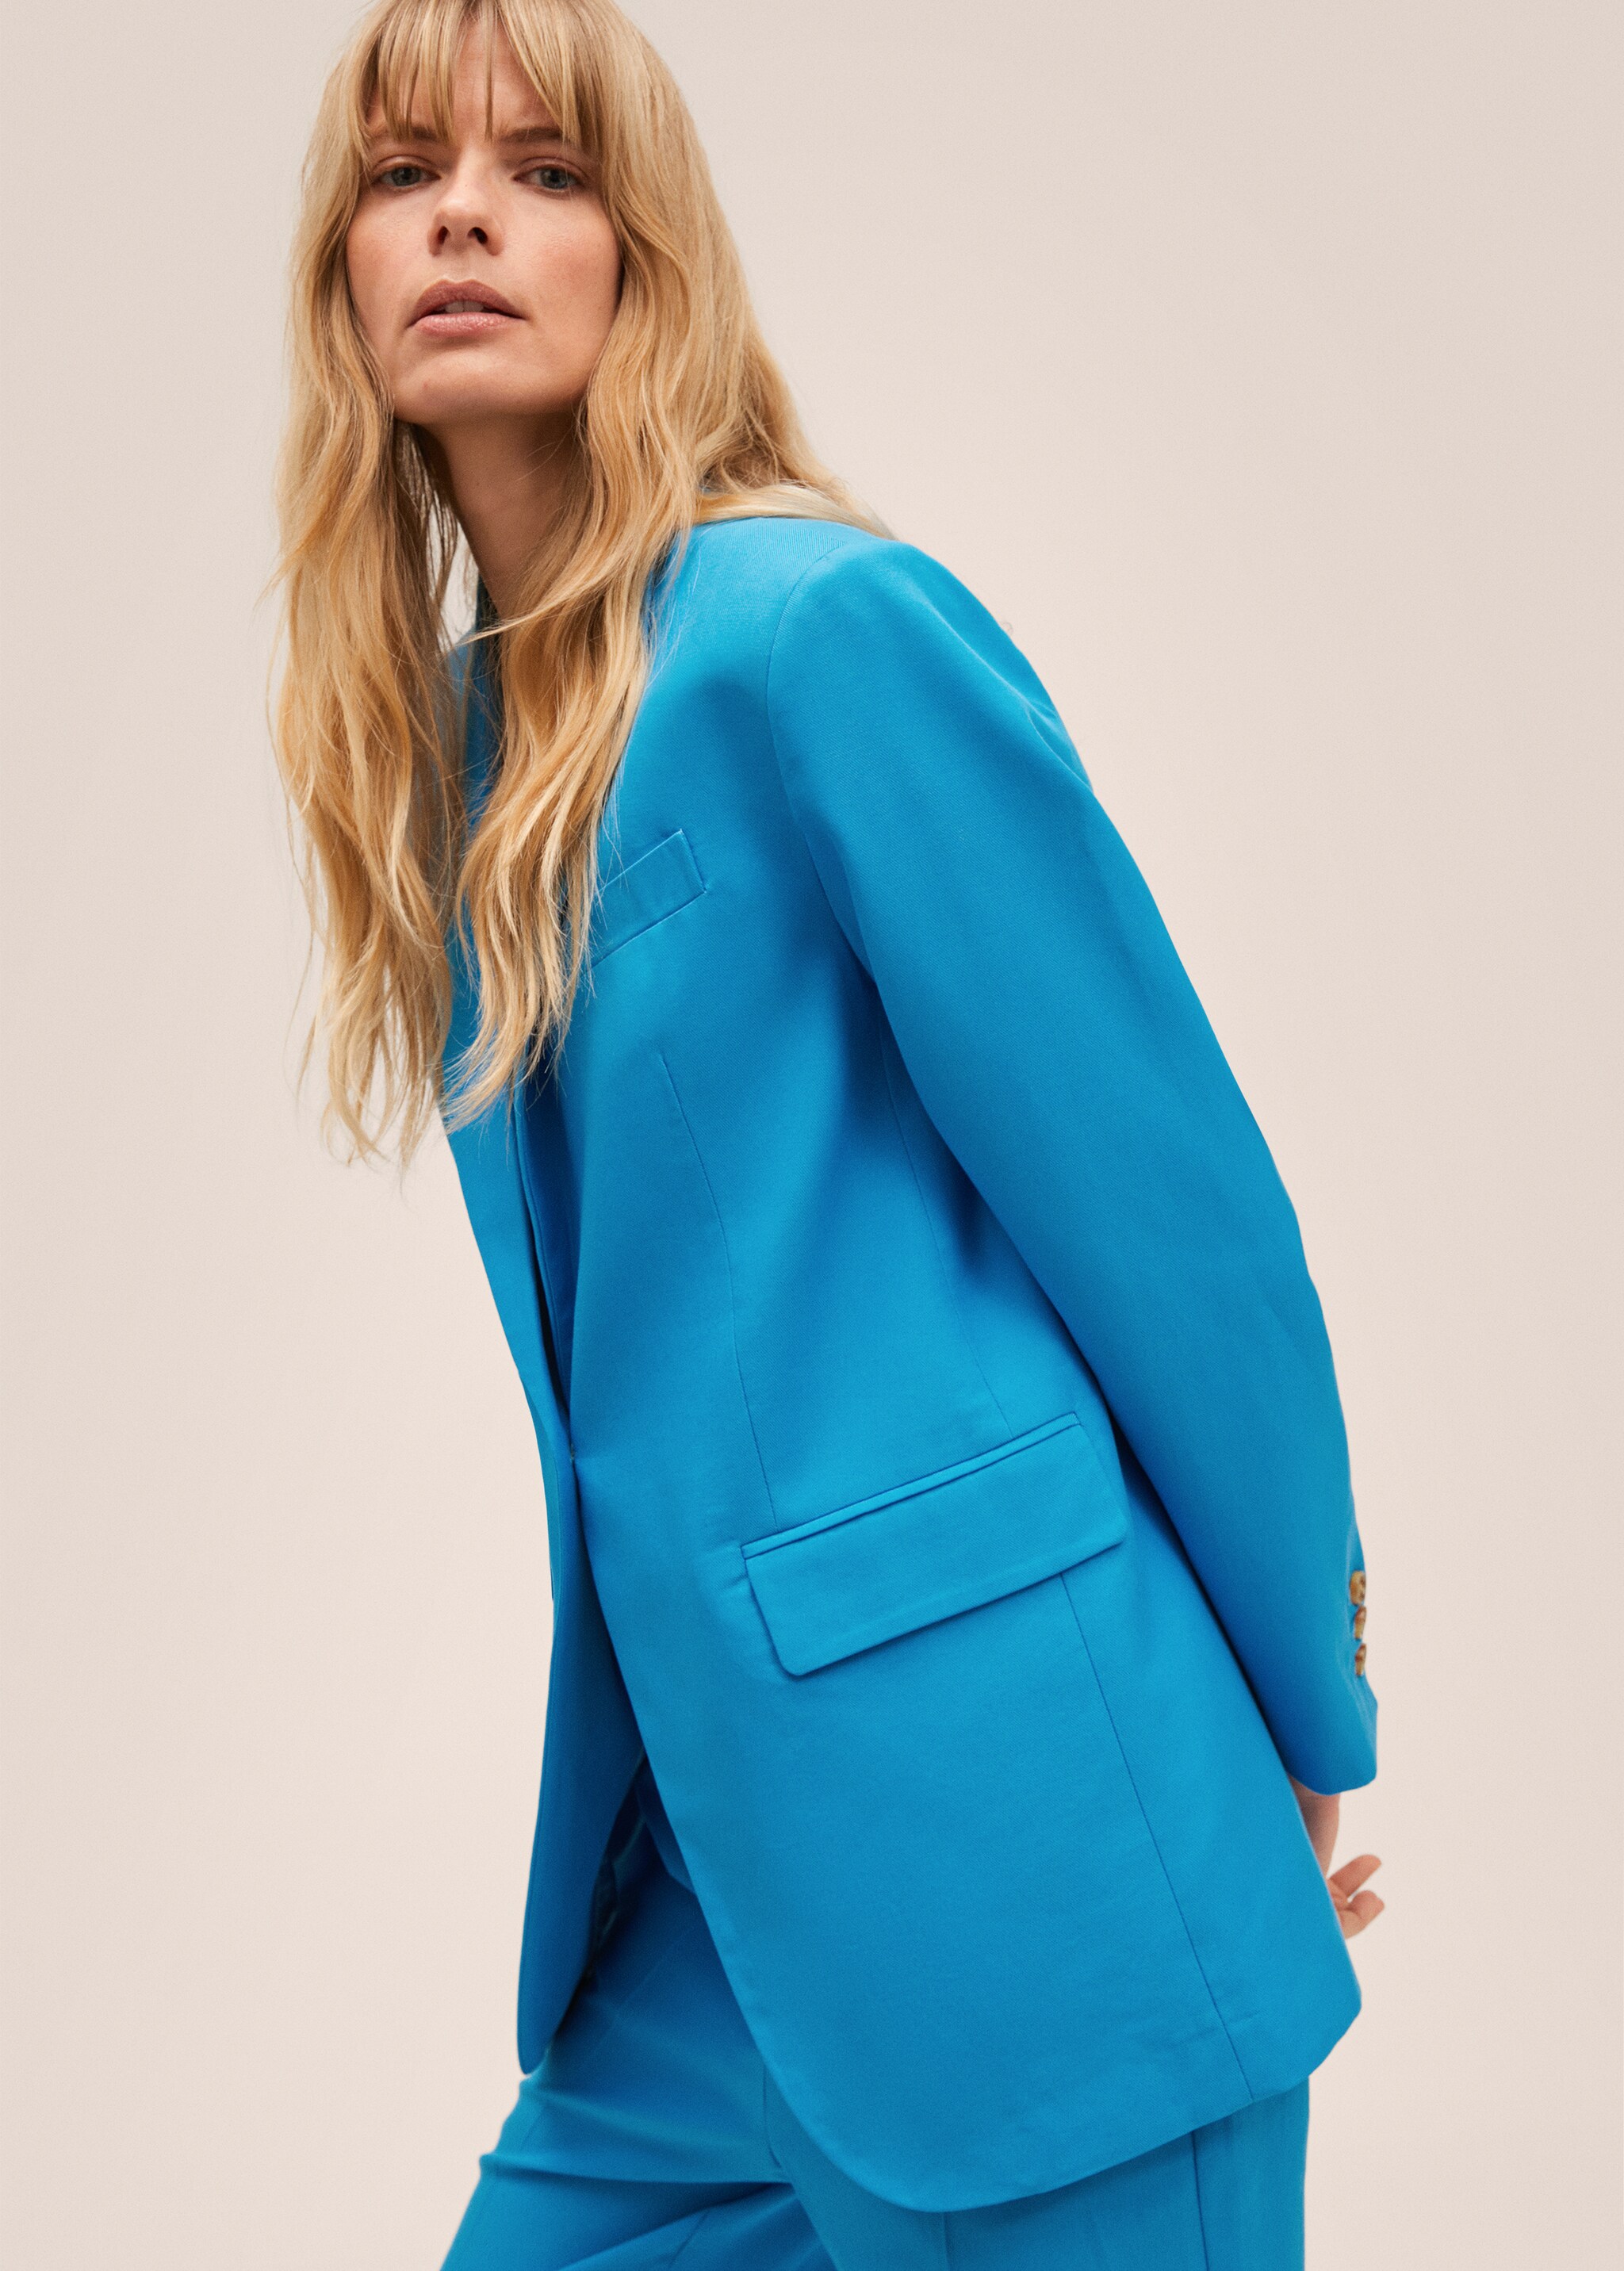 Oversized suit jacket - Details of the article 1